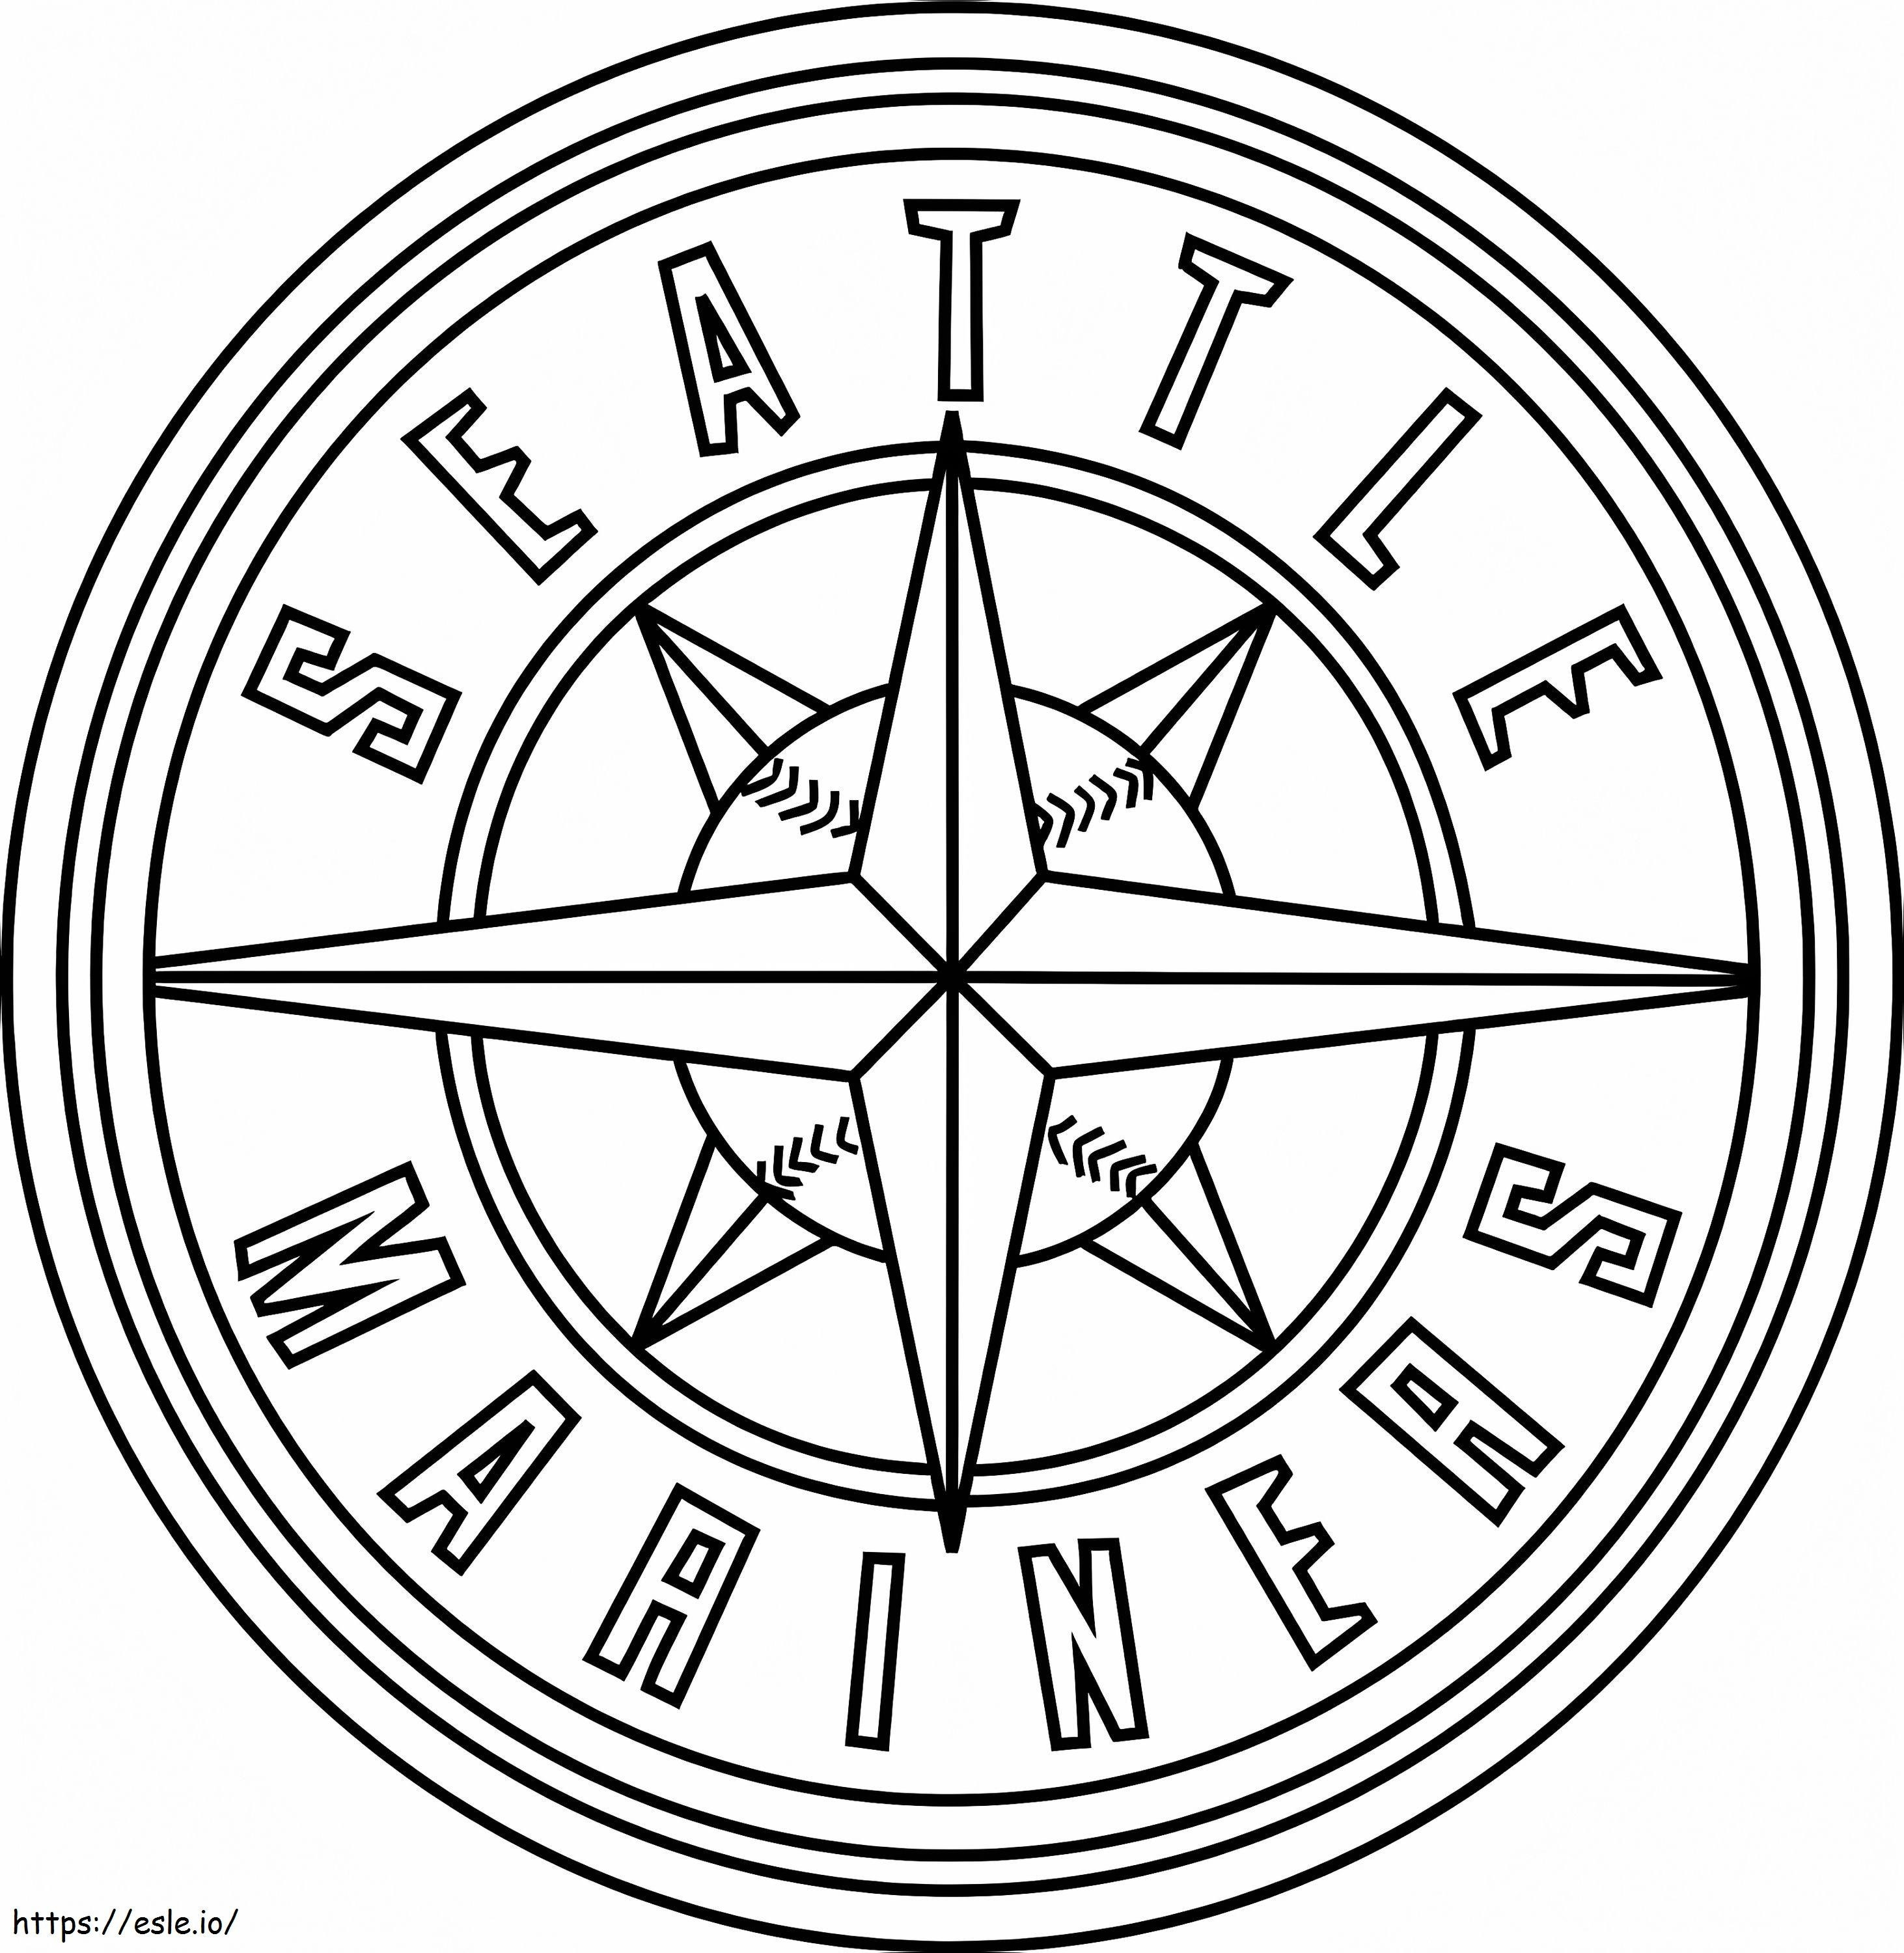 Seattle Mariners Logo coloring page